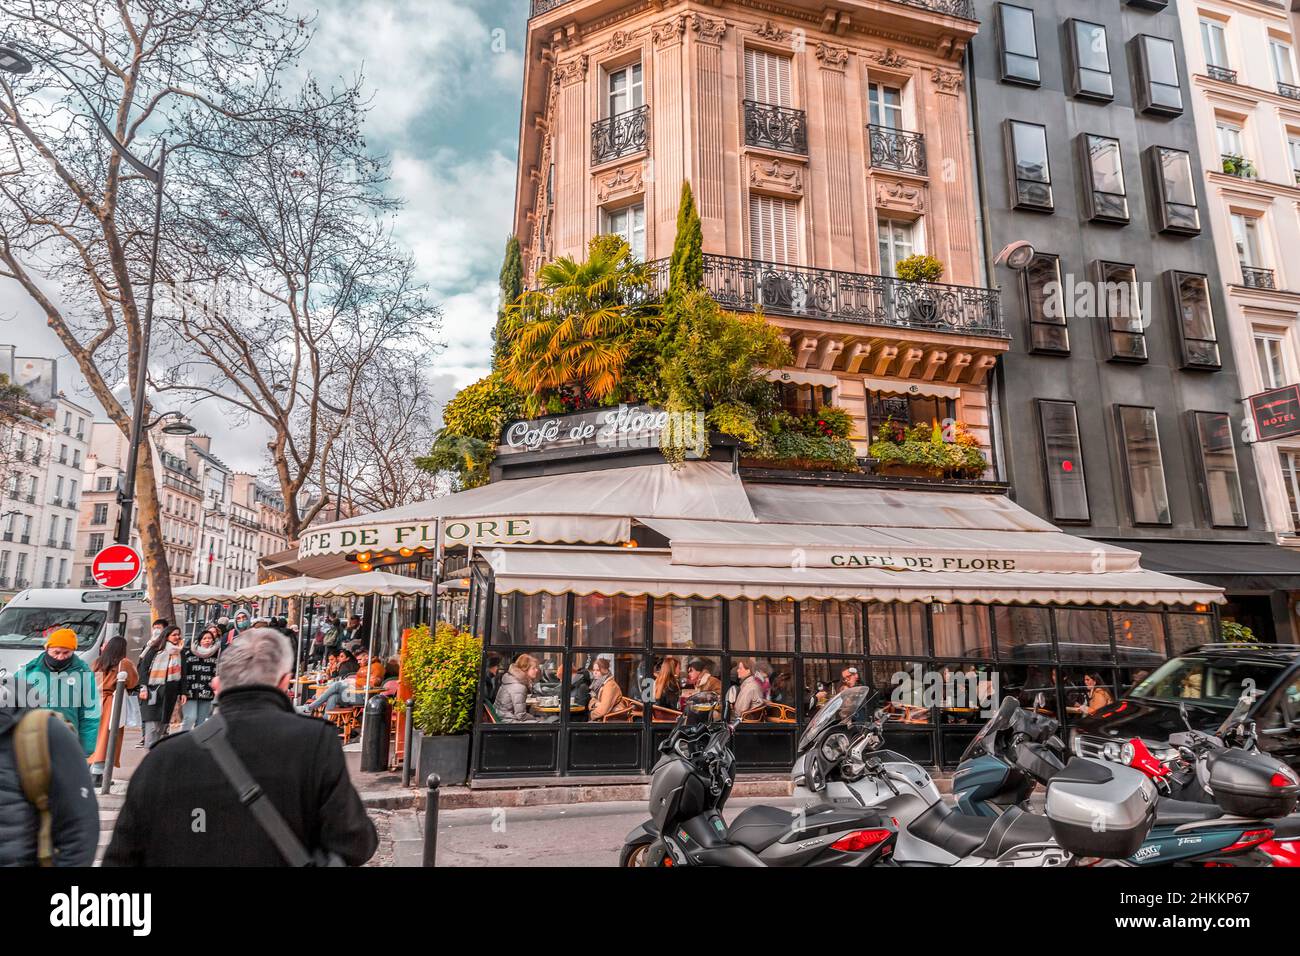 Paris, France - January 20, 2022: General street view from Paris, the French capital. Cafe de Flore bistro-cafe in Saint-Germain. Stock Photo